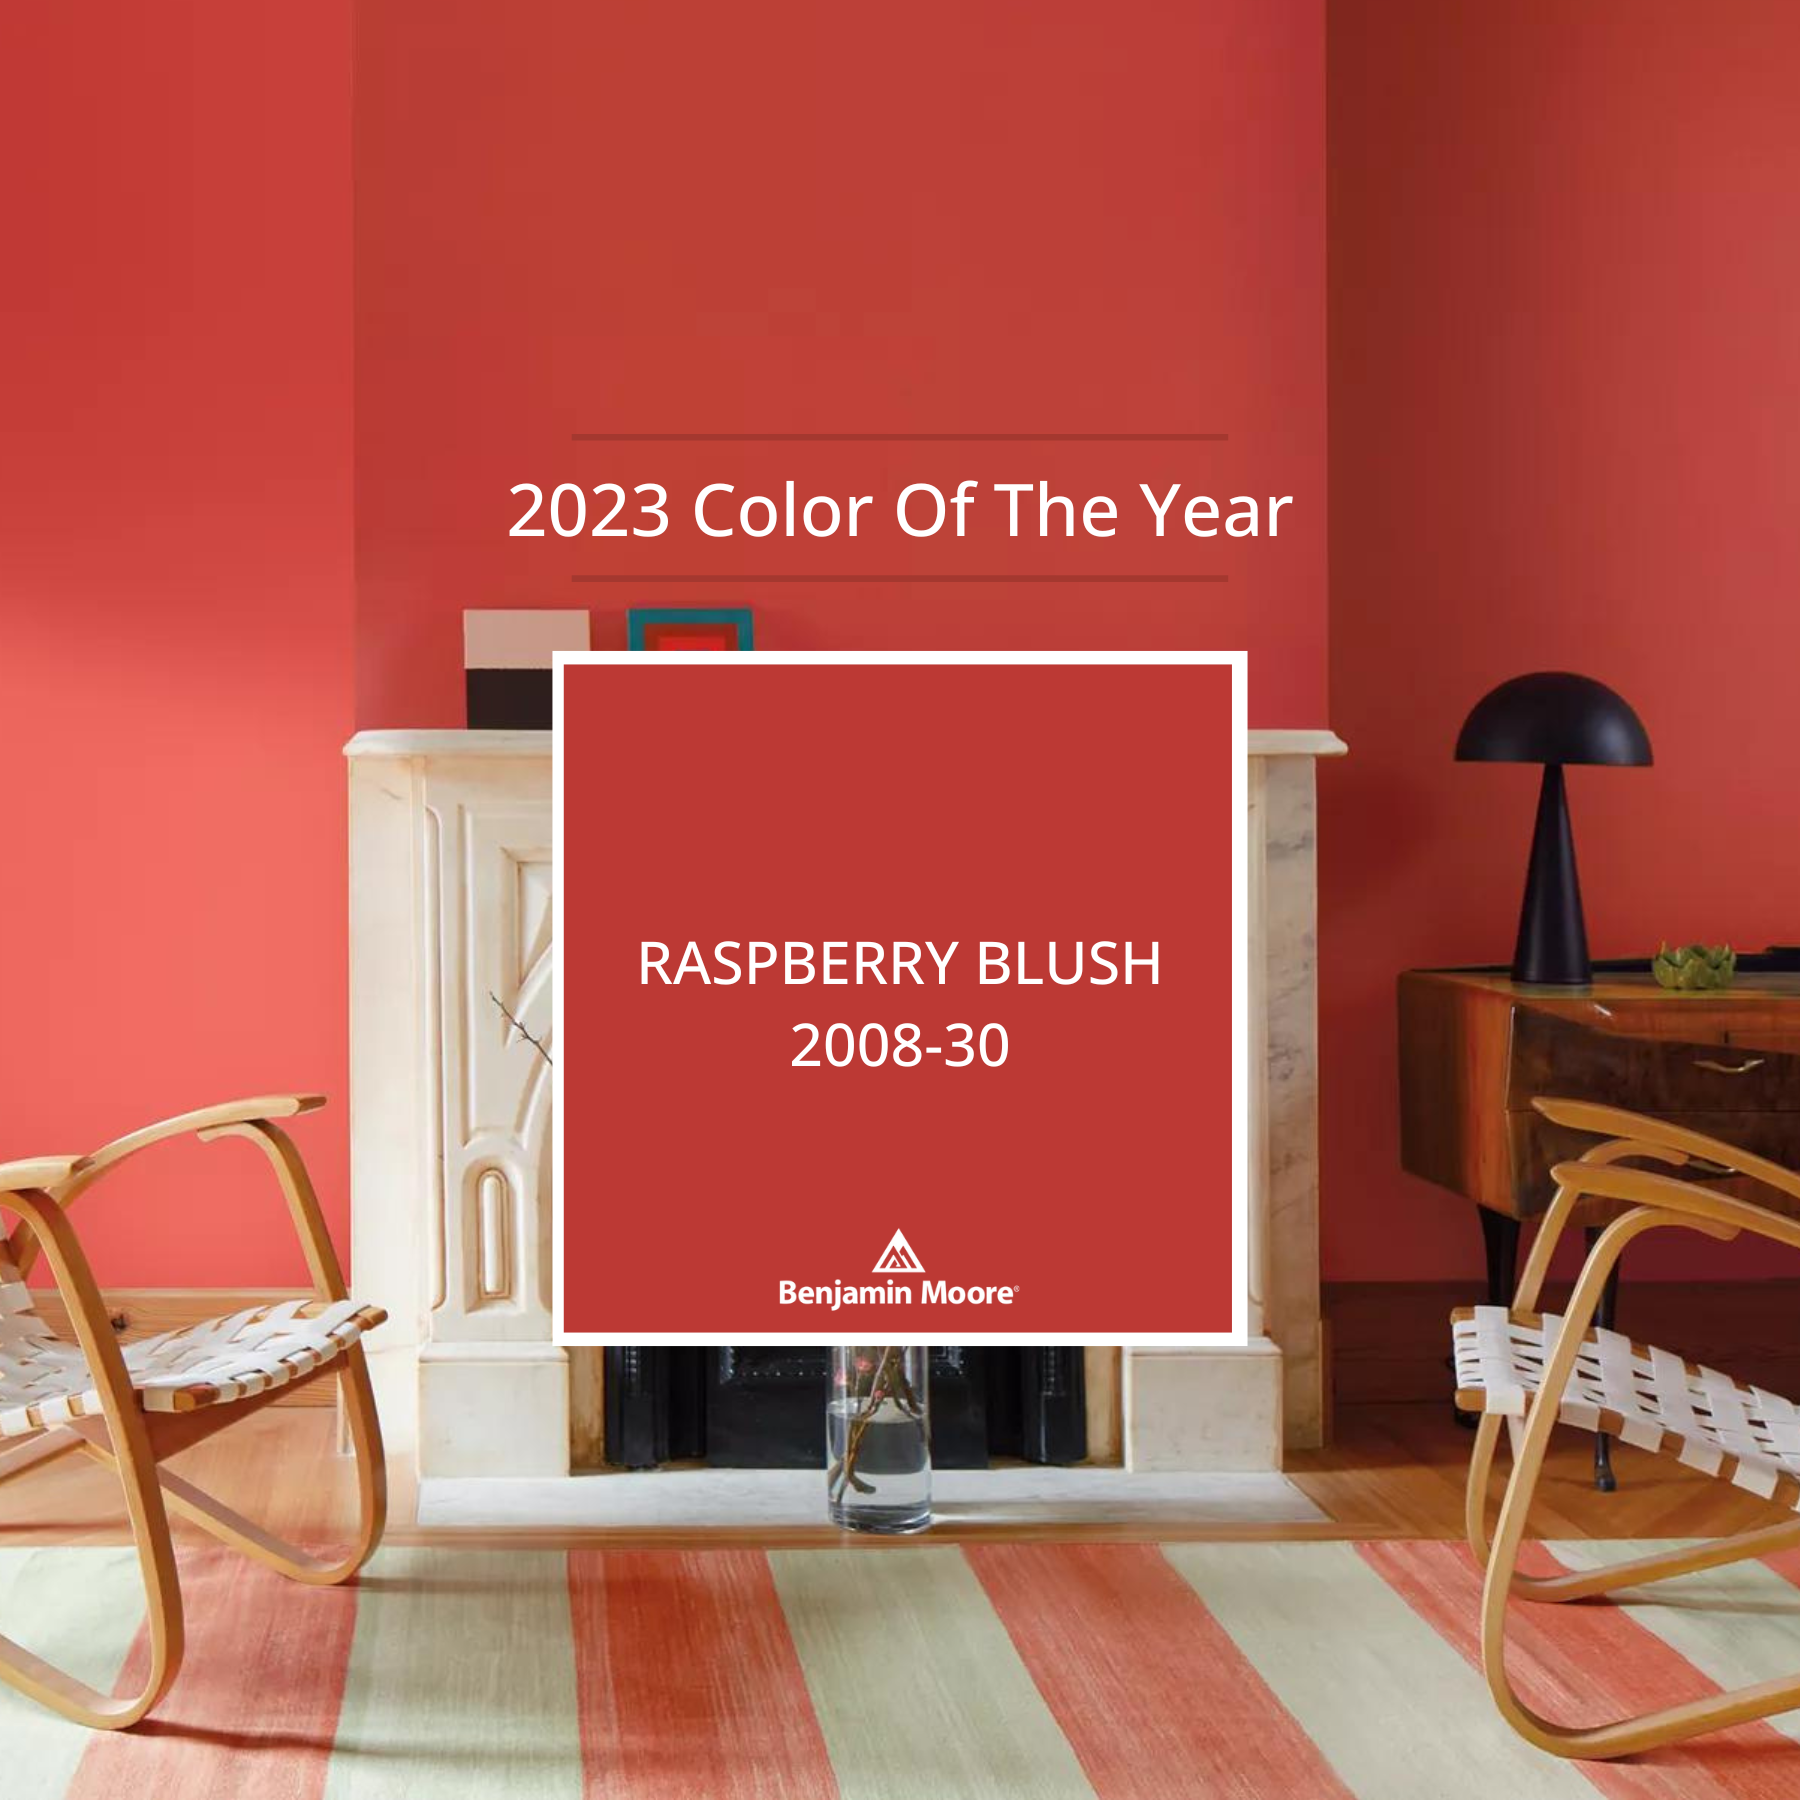 Benjamin Moore Color of the Year 2023: Raspberry Blush 2008-30 at Barrydowne Paint in Sudbury, ON